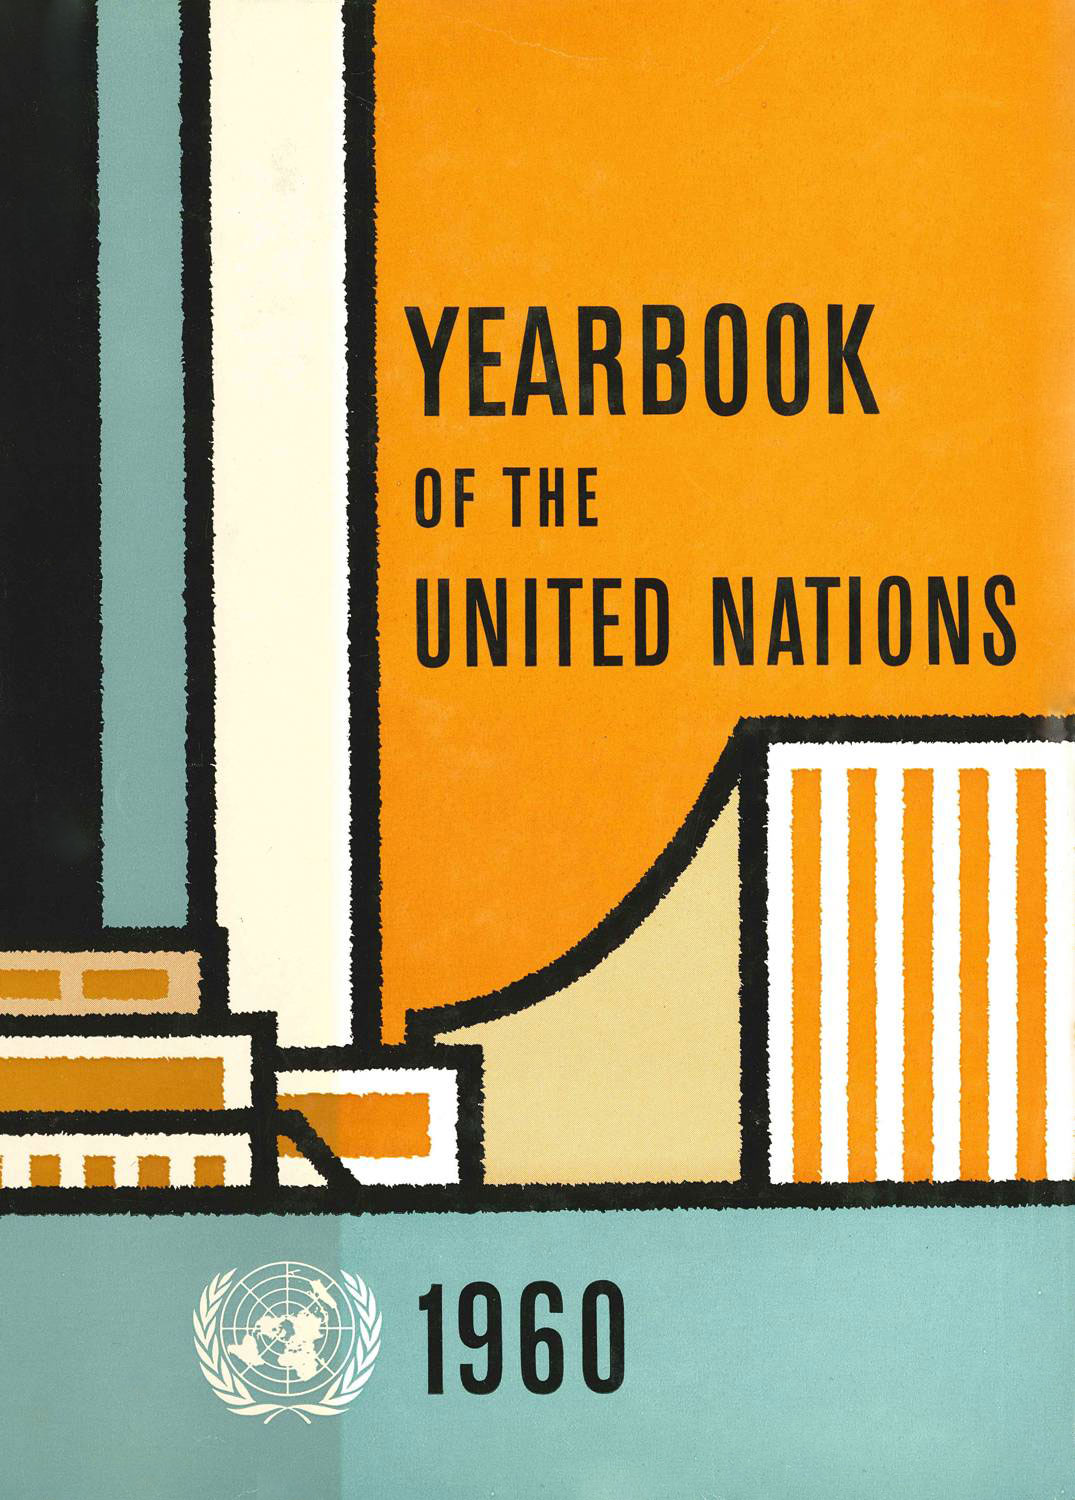 image of Yearbook of the United Nations 1960